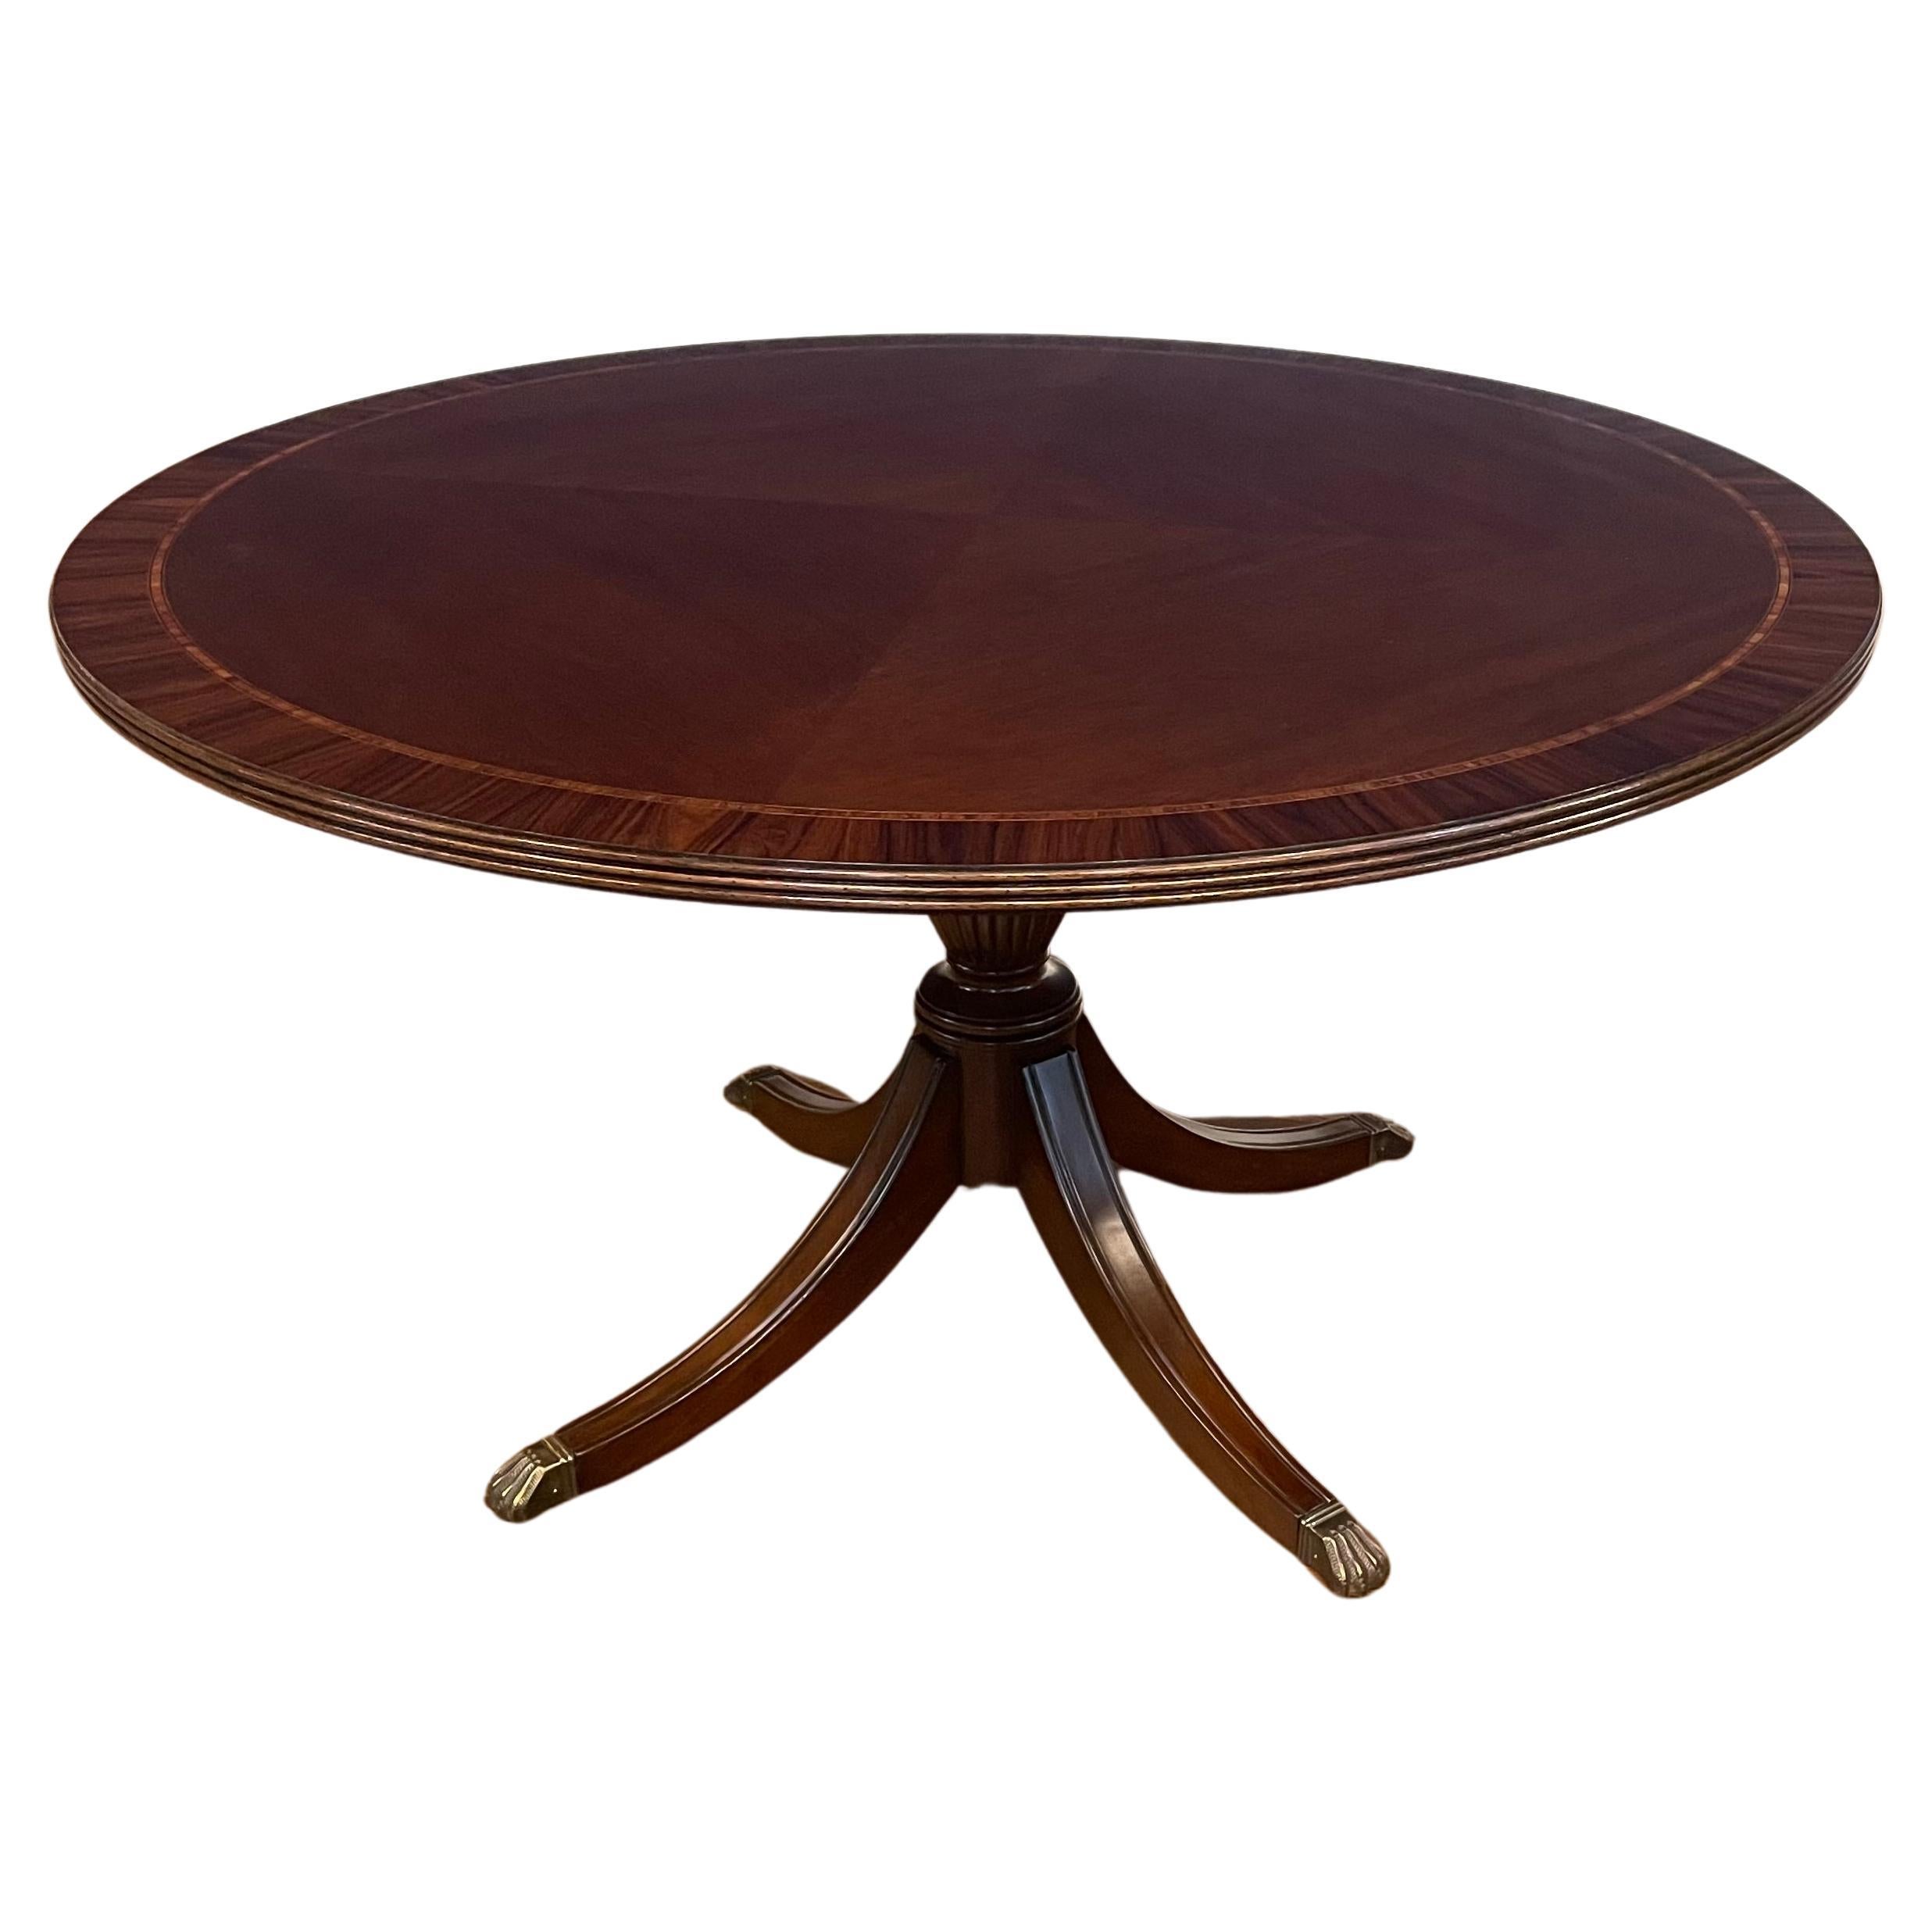 54 Inch Round Mahogany Dining Table by Leighton Hall - Showroom Sample